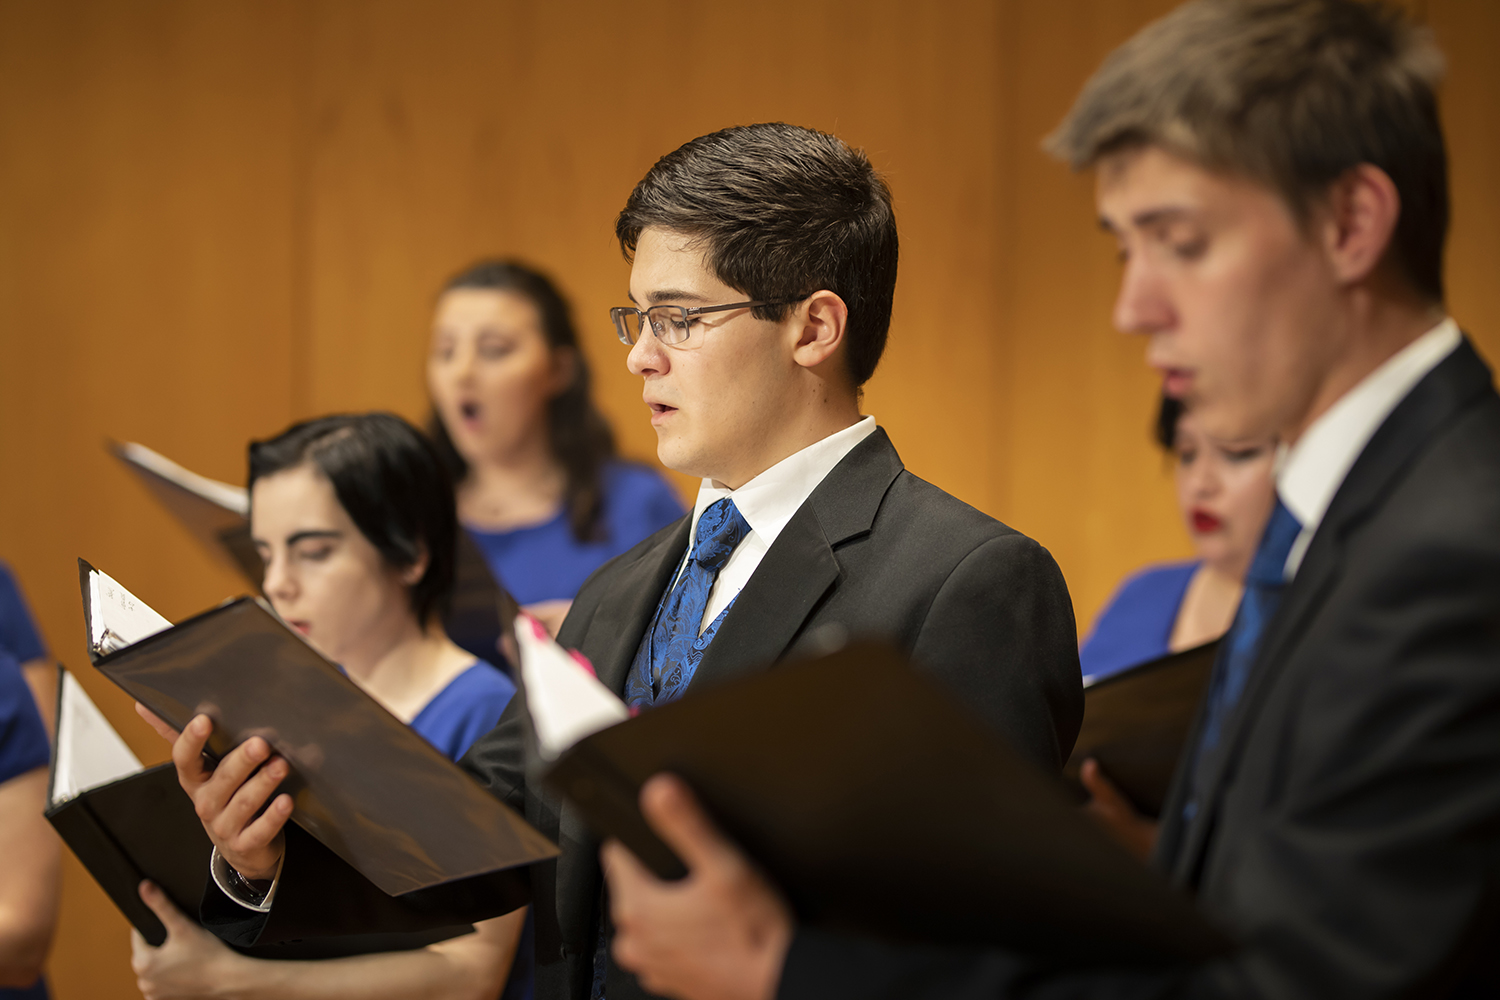 The UWF Singers music ensemble performing in the Music Hall in the Center for Fine and Performing Arts on Friday, Nov. 9, 2018.